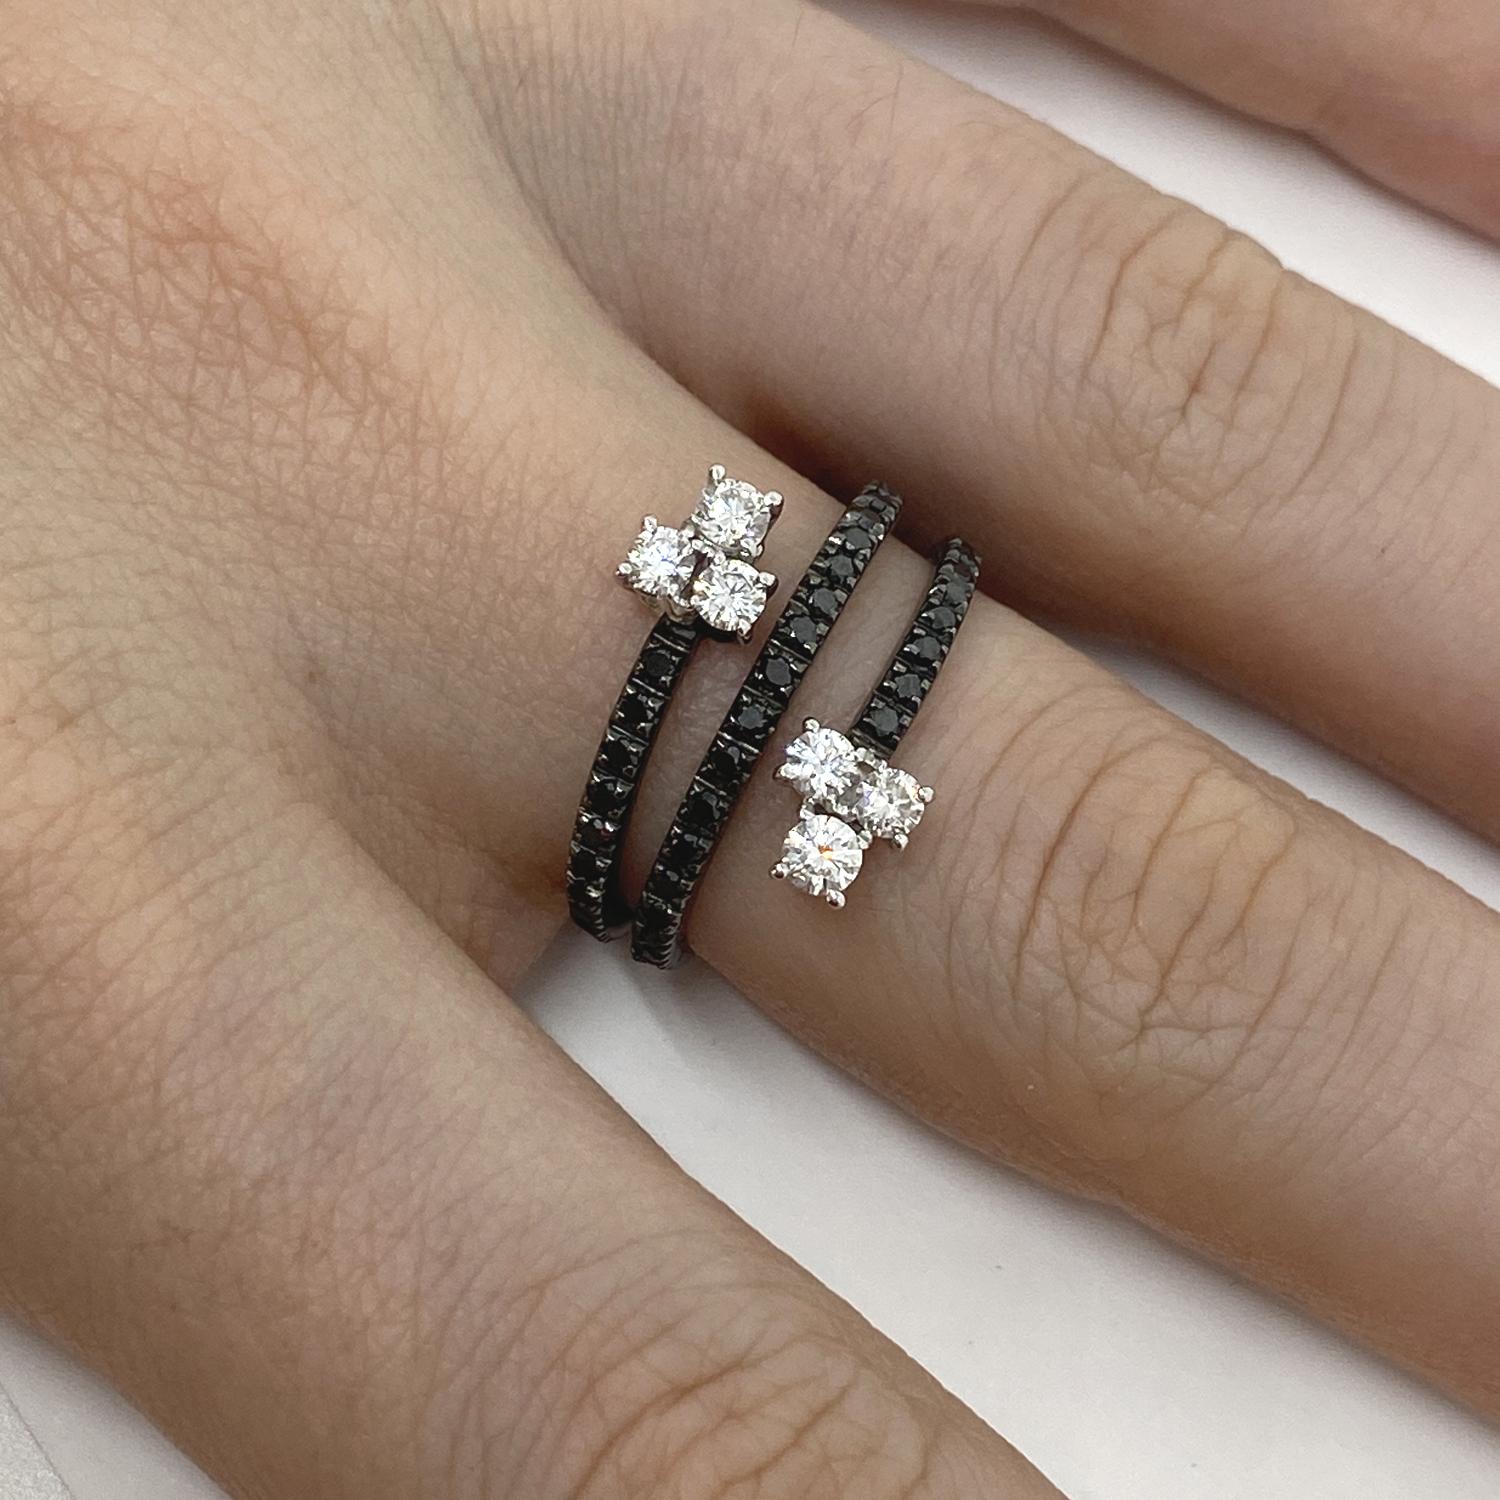 Ring made of 18kt burnished white gold with black and white natural brilliant-cut diamonds for ct.0.94

Welcome to our jewelry collection, where every piece tells a story of timeless elegance and unparalleled craftsmanship. As a family-run business